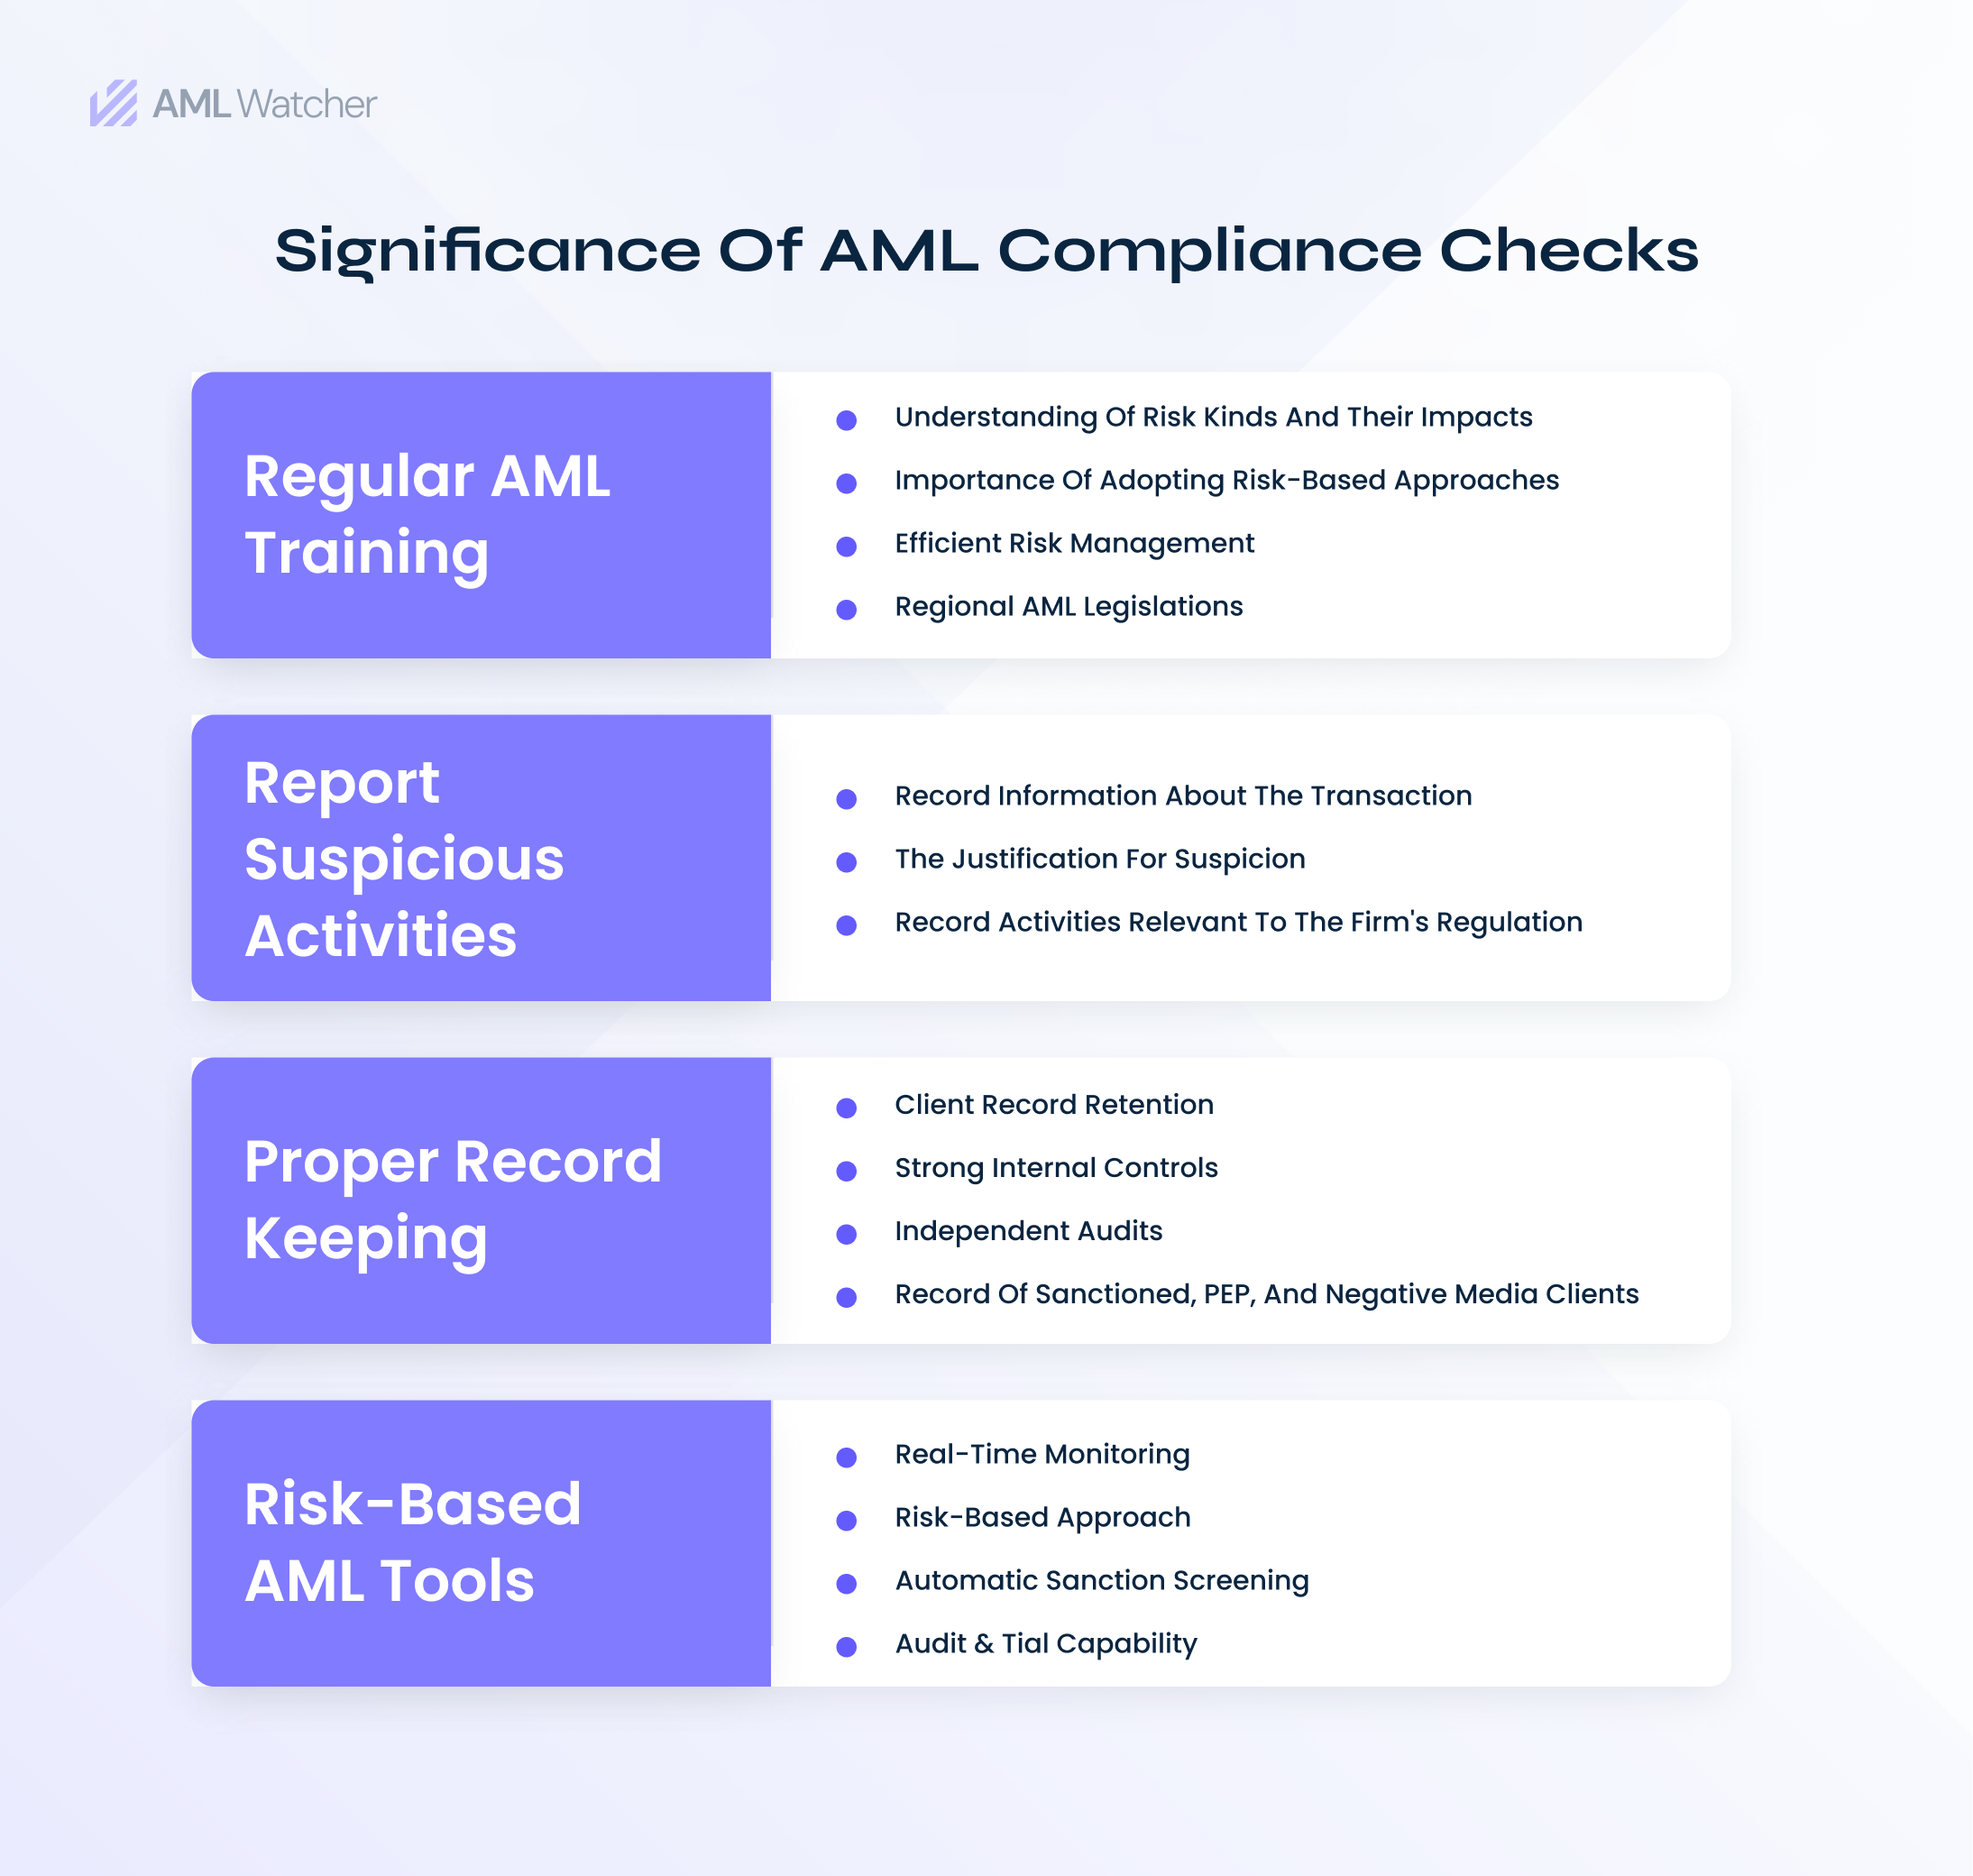 The image shows the advantages of AML compliance checklists for financial institutions. 